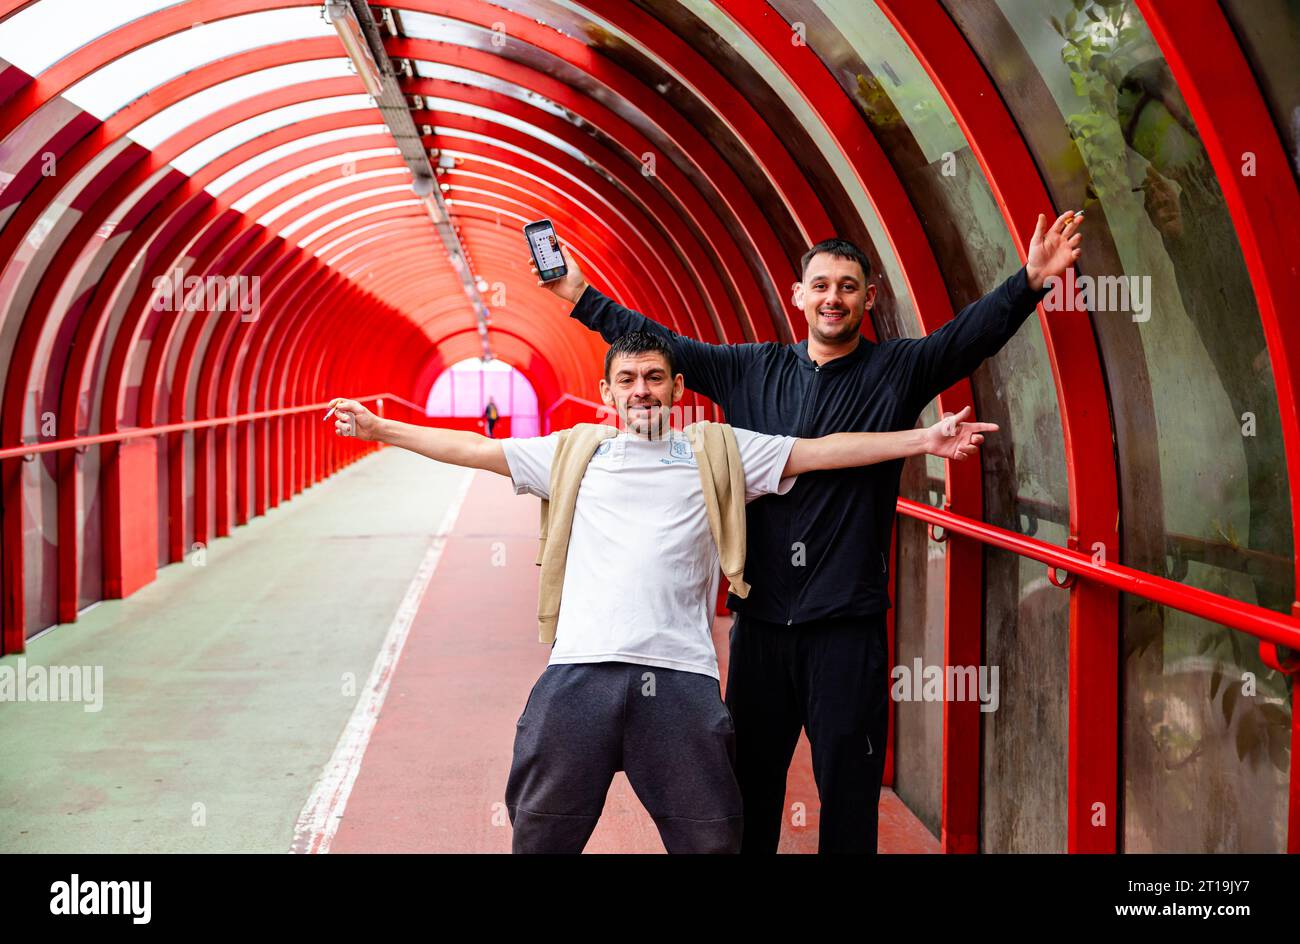 Two likely locals happily posing with phones and cigarettes in their hands and insistent that their photo was taken in the SECC tunnel/ bridge Stock Photo